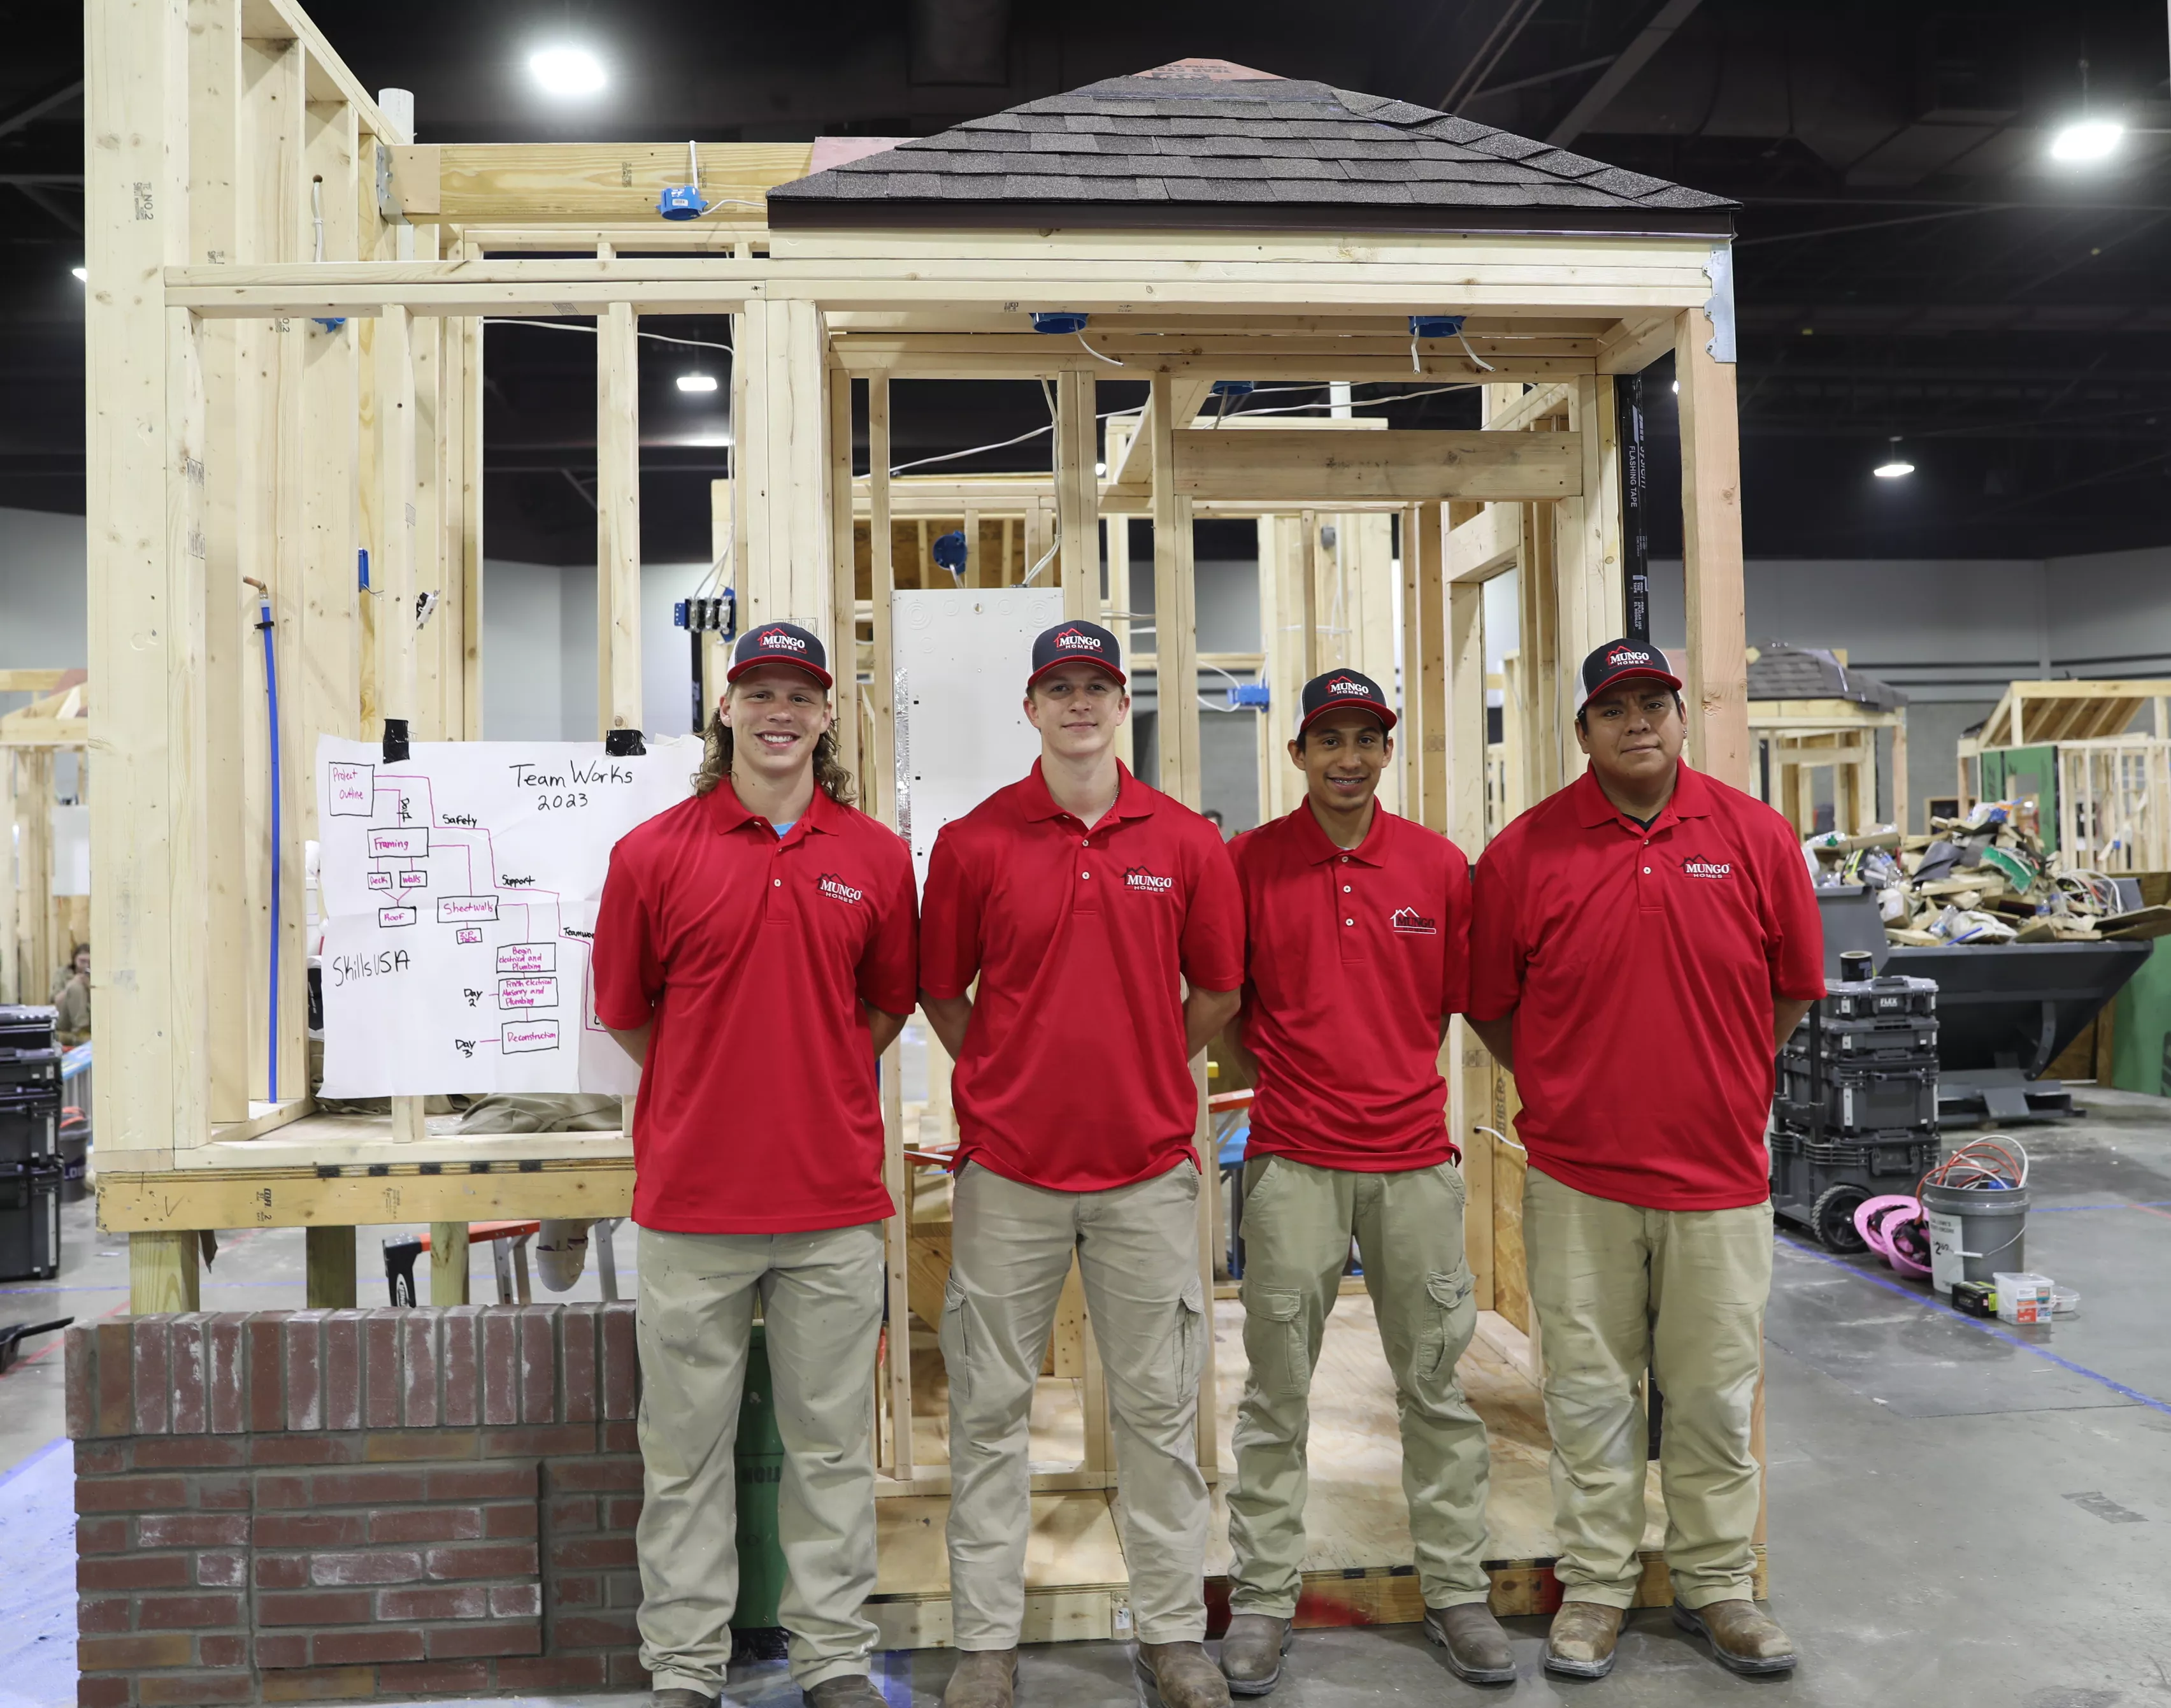 Cameron Drake, Ethan Reynolds, William Rodriguez, and Angel Mendoza standing together and smiling in front of house frame